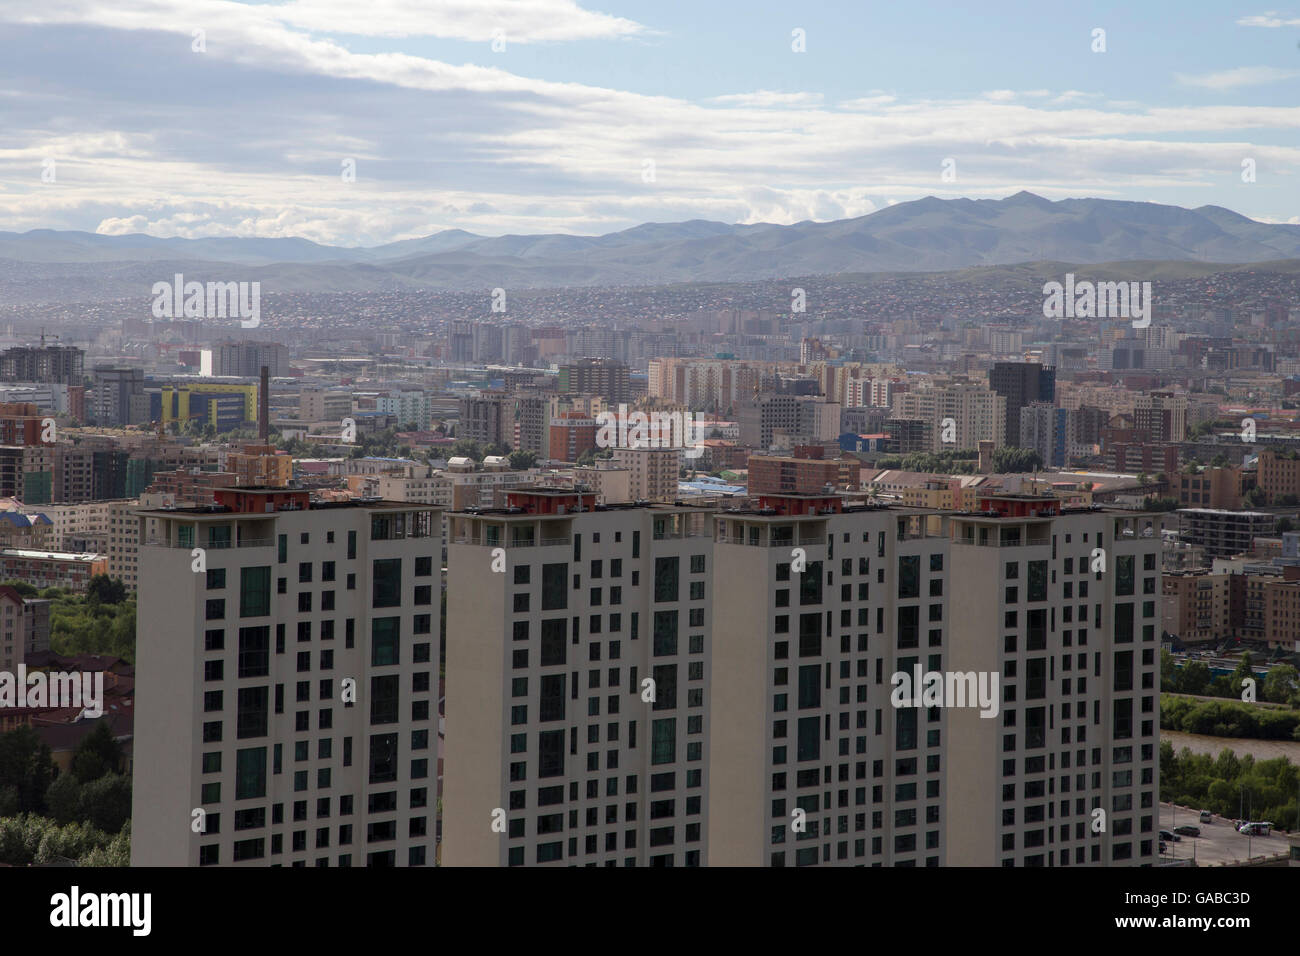 View of Ulaanbaatar from the height of the memorial complex on the outskirts of the Capital city of Mongolia Stock Photo